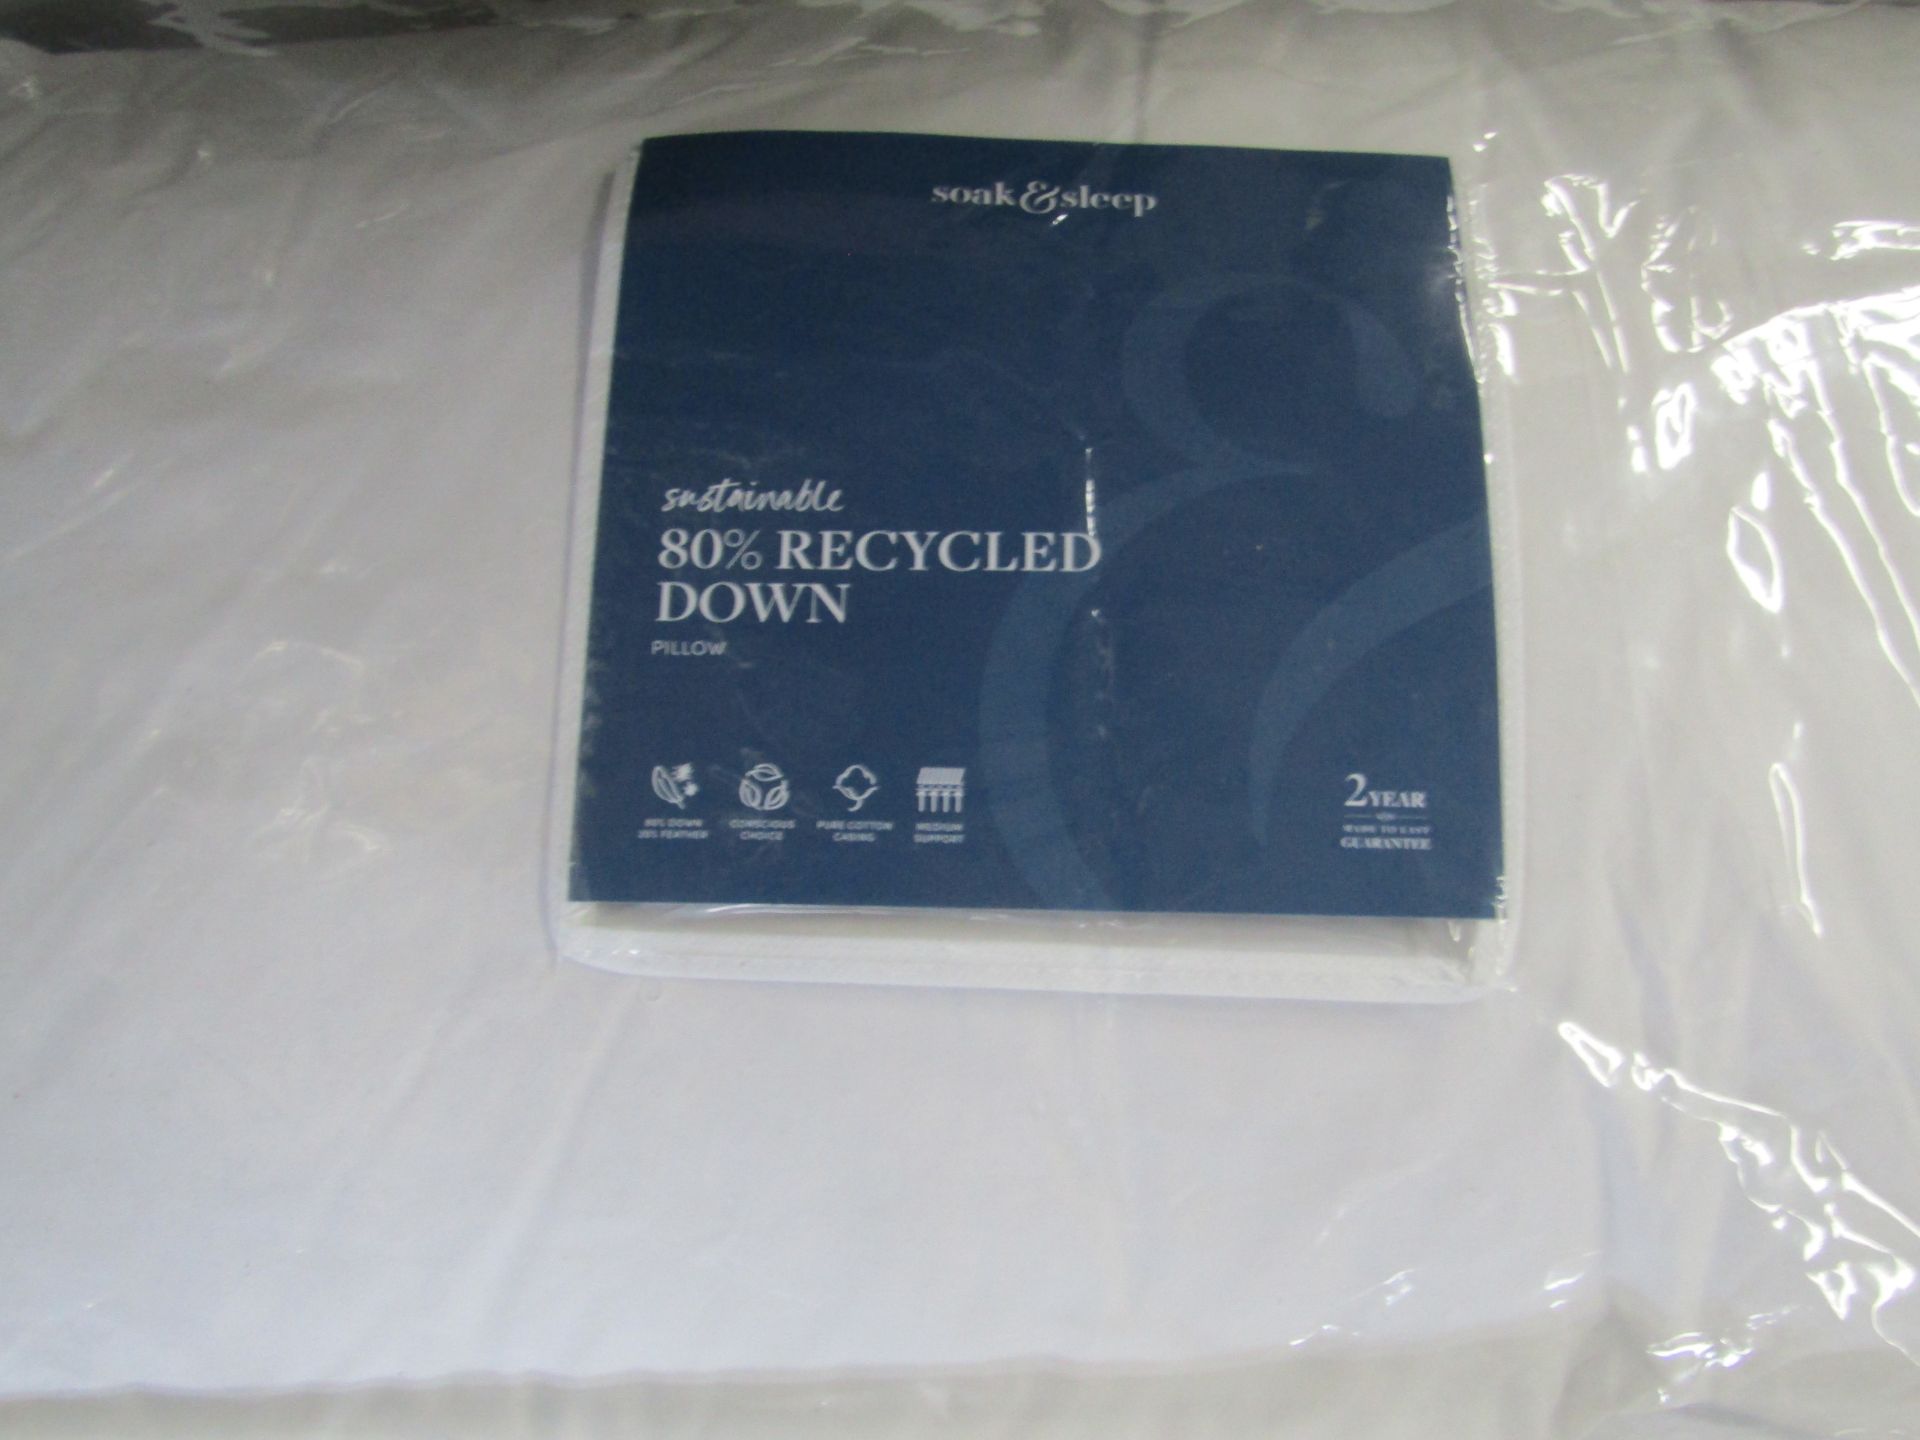 Soak & Sleep 80% Recycled Down Superking Pillow - Medium RRP 38About the Product(s)Reduce your - Image 2 of 2